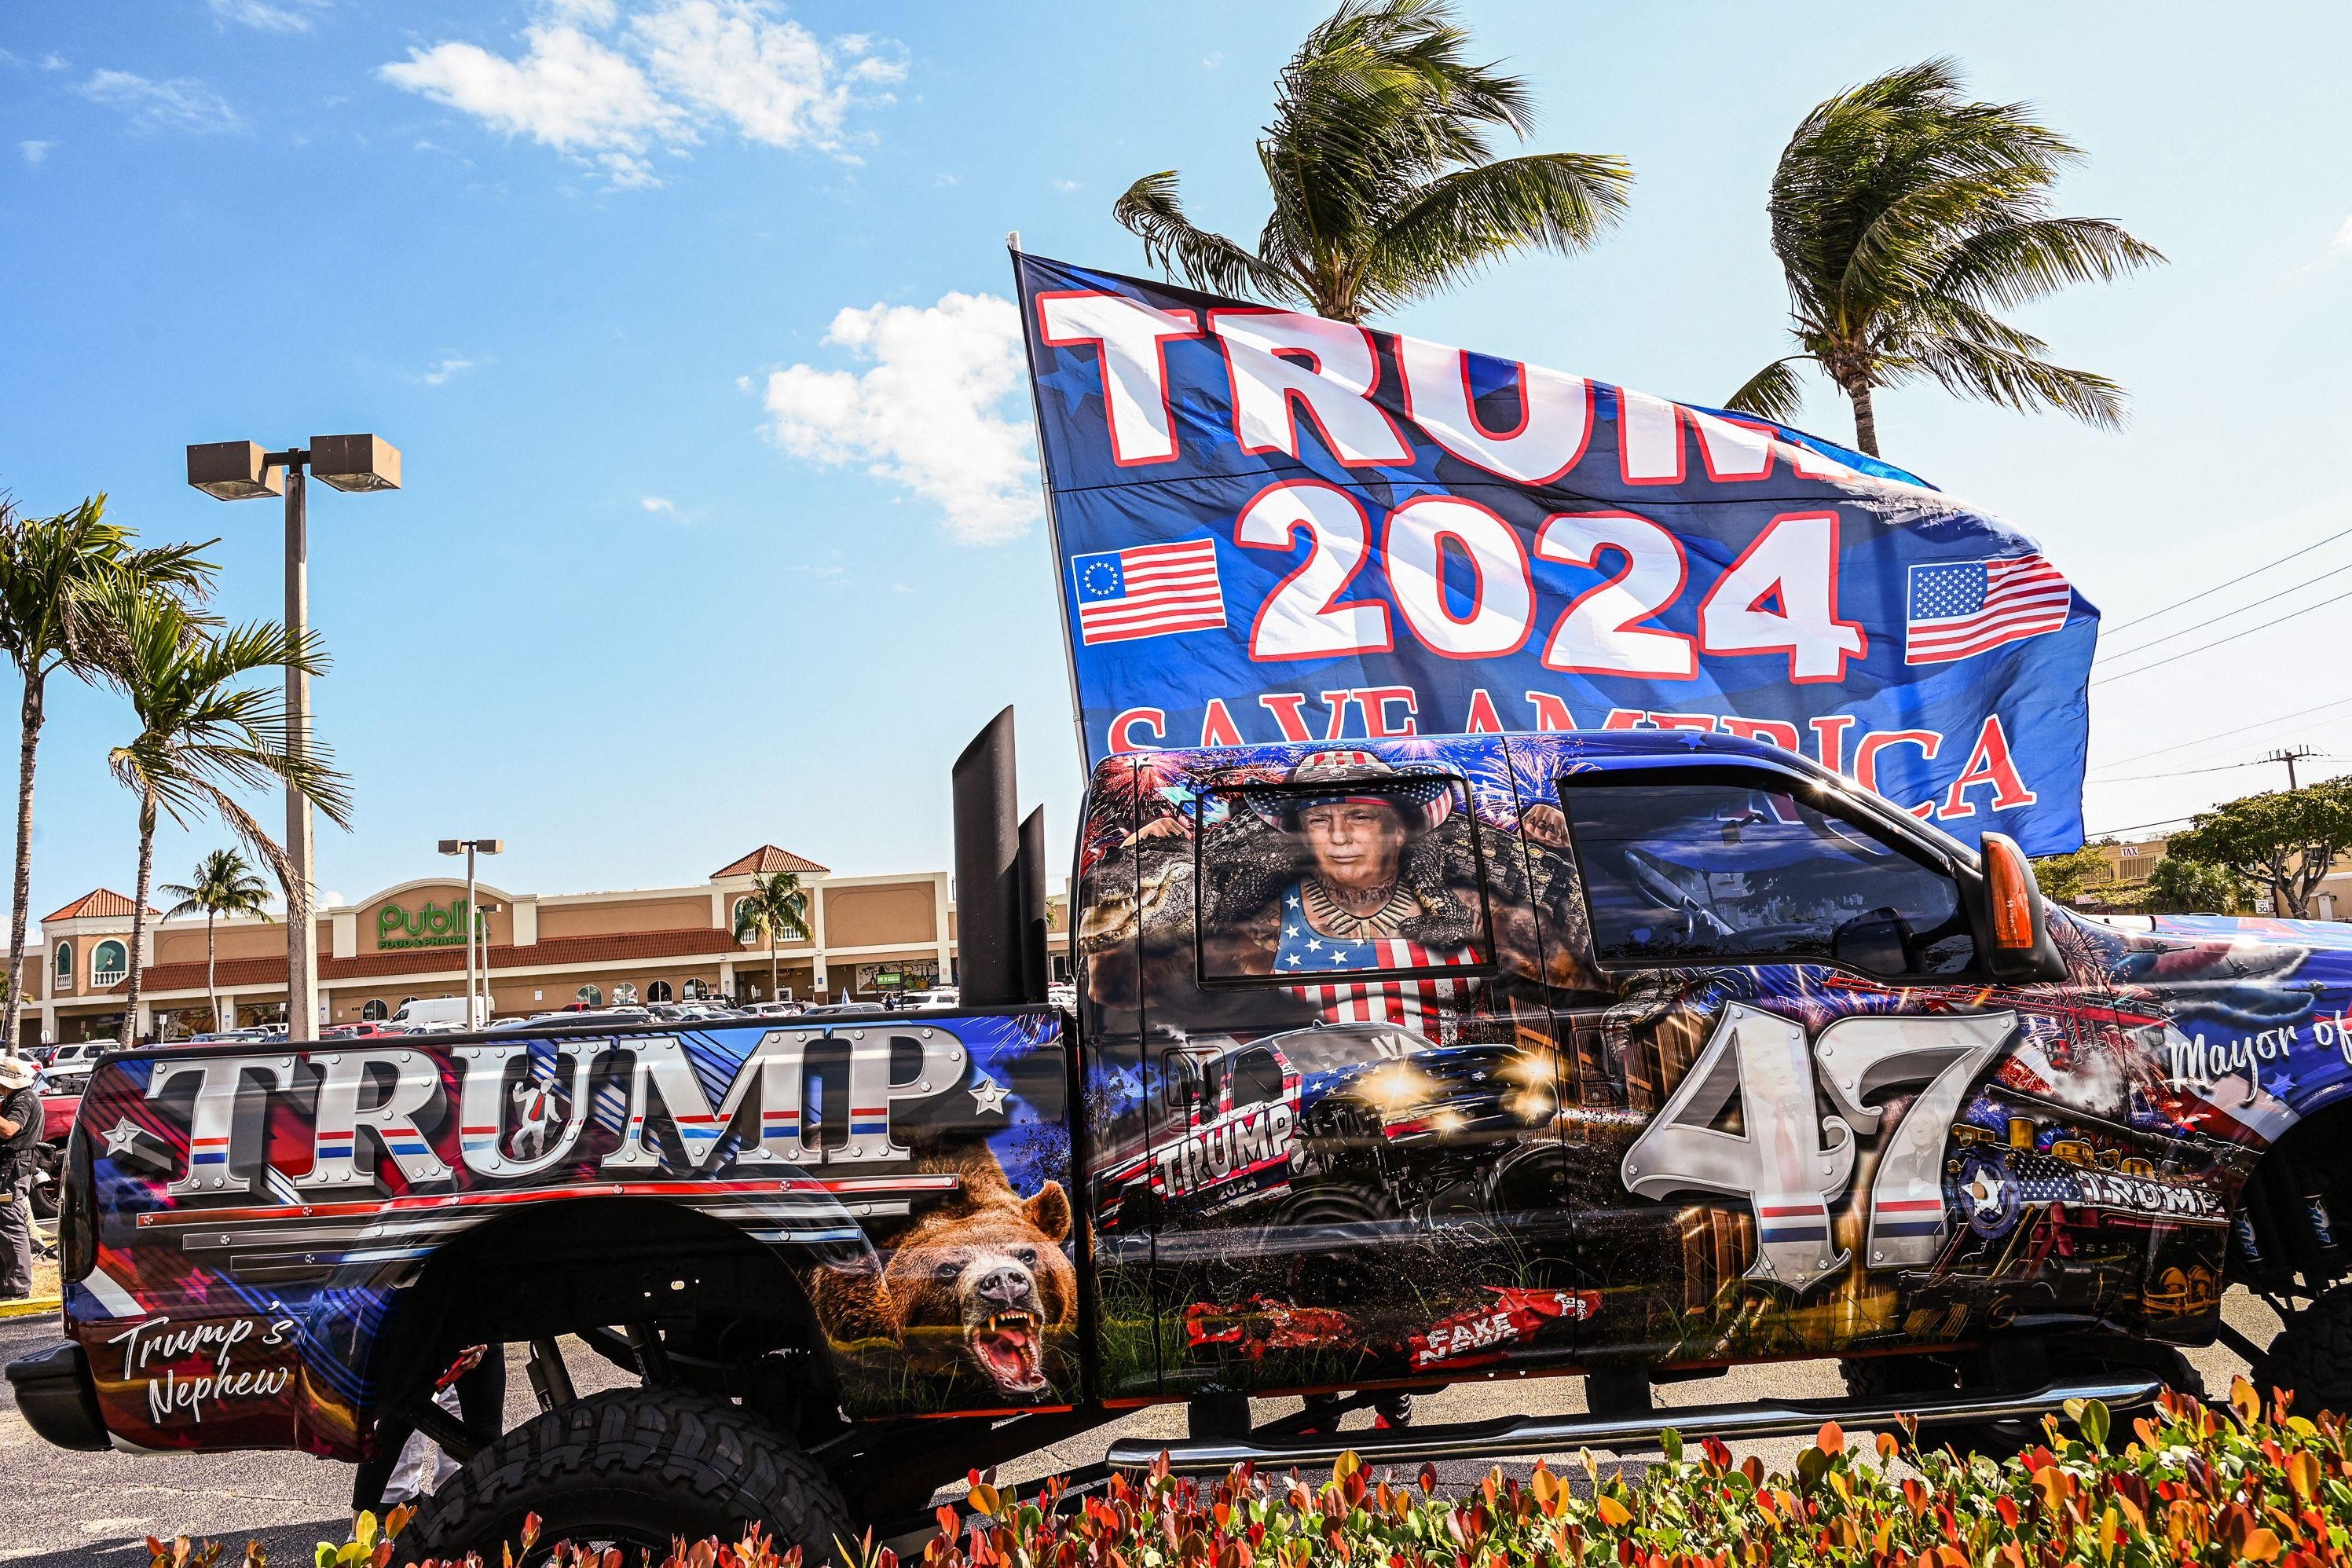 Trump 2024 Save America banner hangs in front of a decked out Trump painted truck.